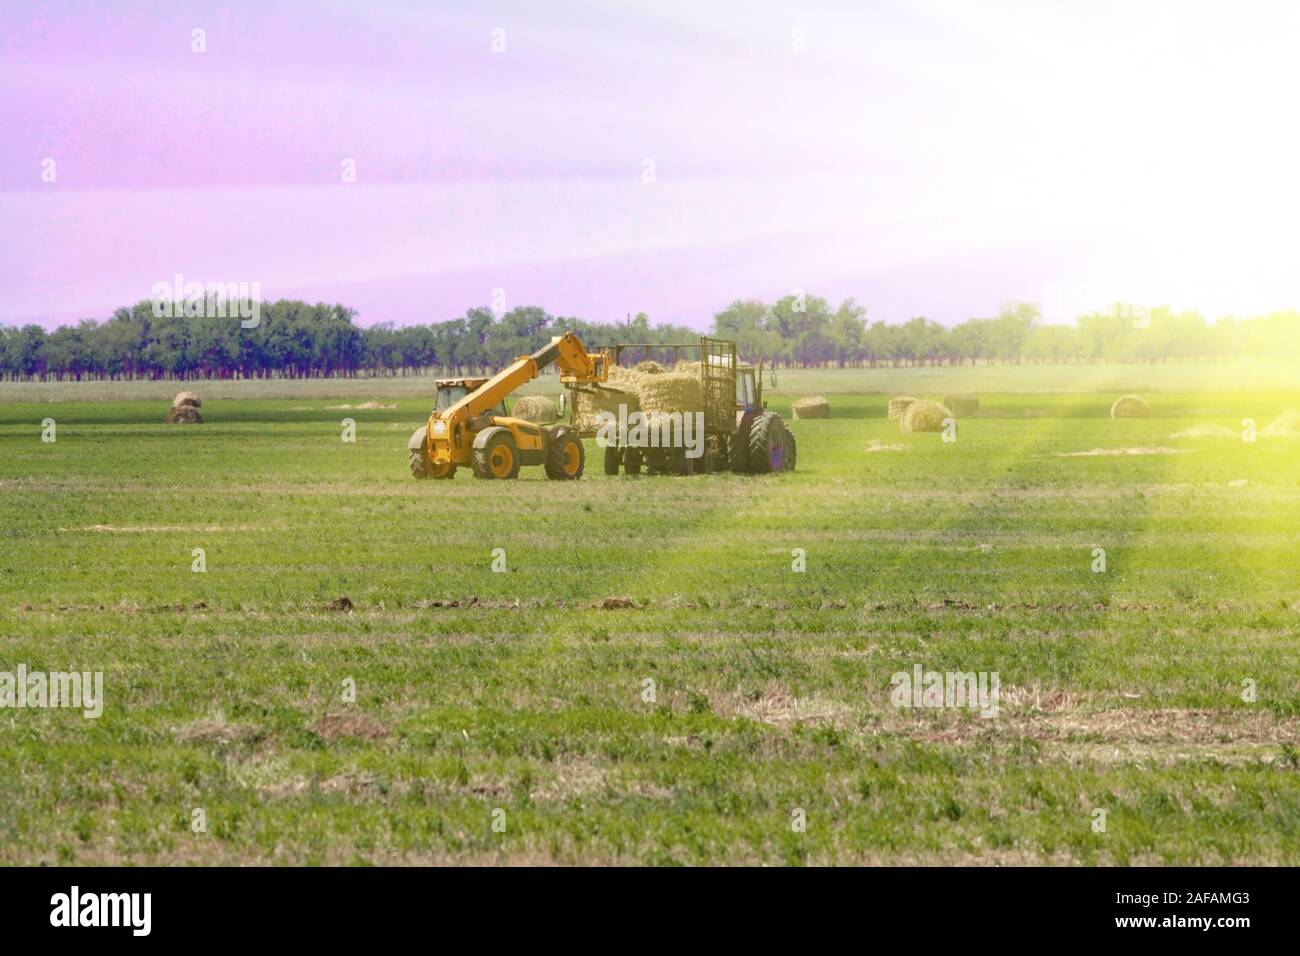 An agricultural tractor loader loads bales of hay into a tractor trailer on the field Stock Photo